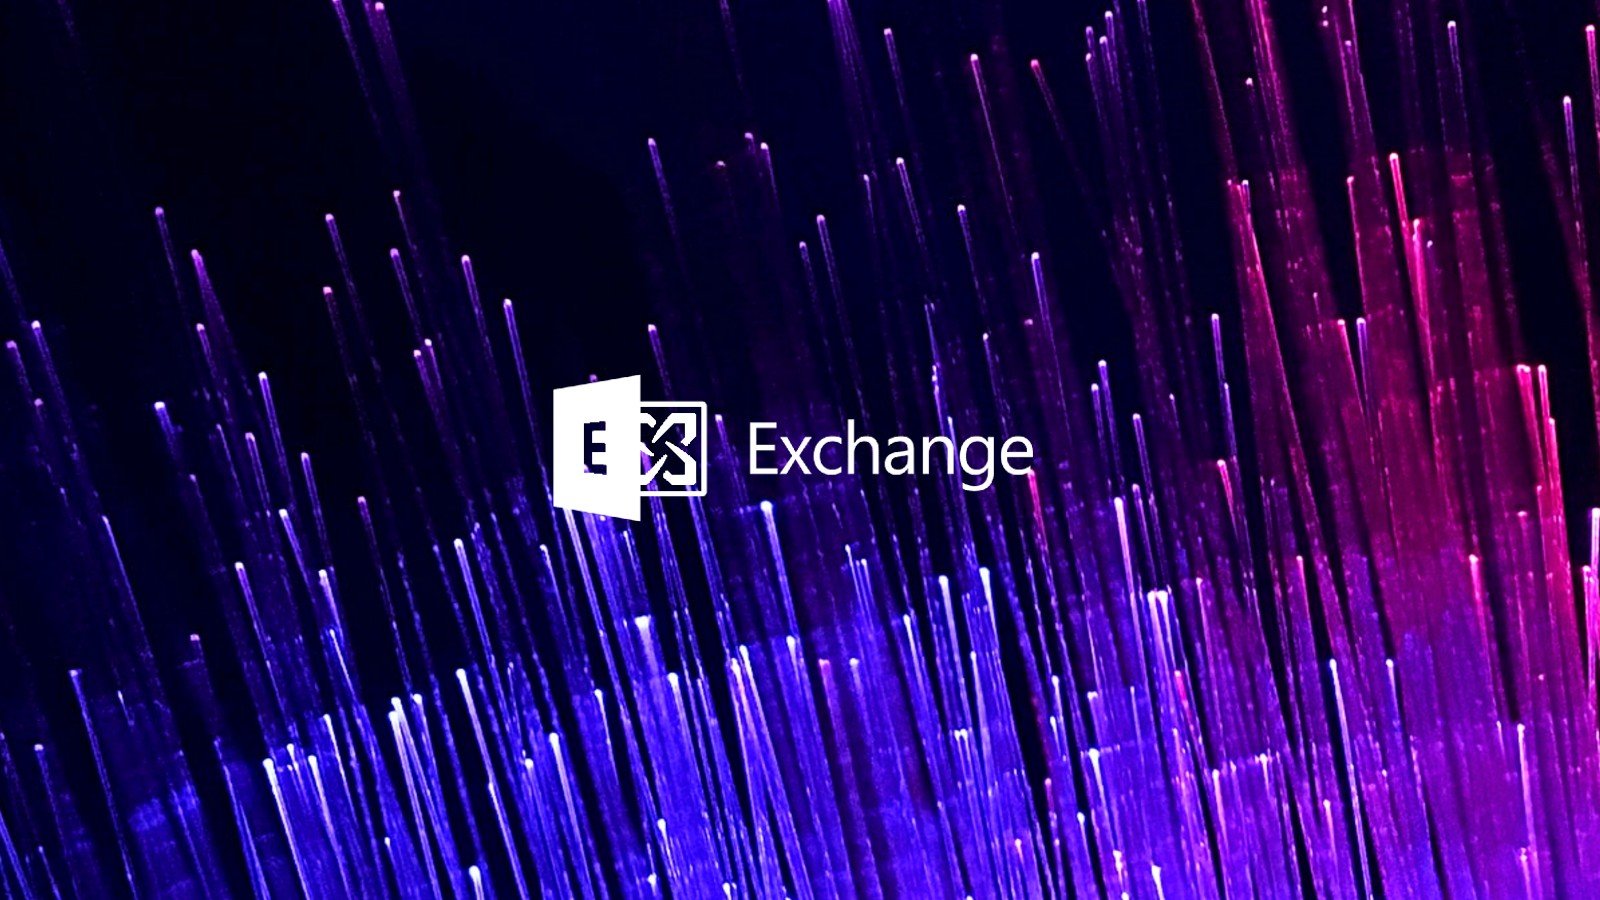 Microsoft Exchange Online outage blocks access to mailboxes worldwide